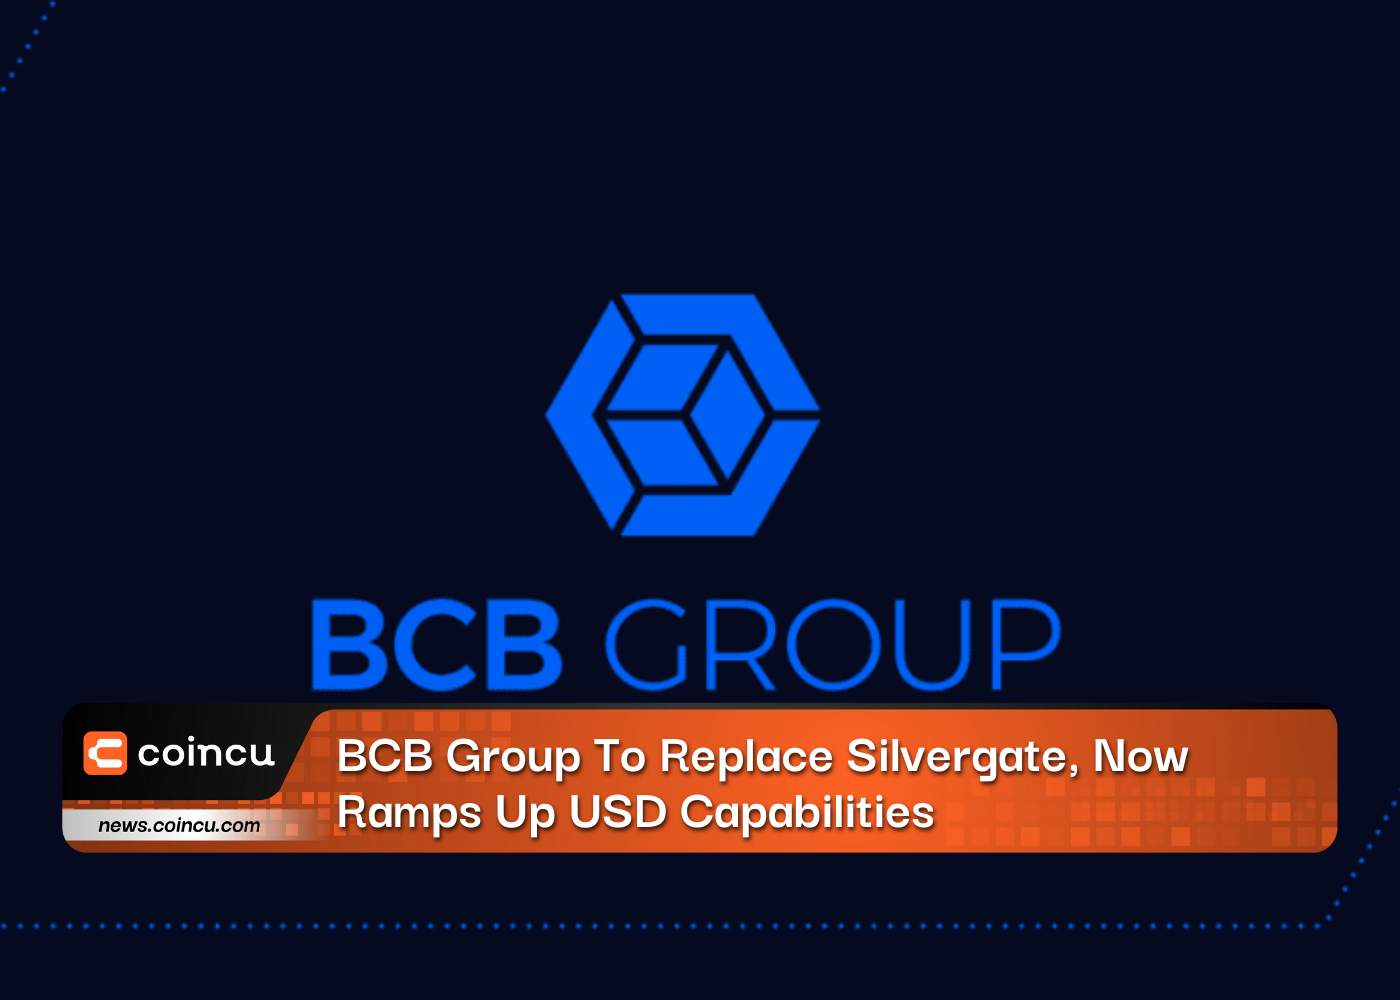 BCB Group To Replace Silvergate, Now Ramps Up USD Capabilities